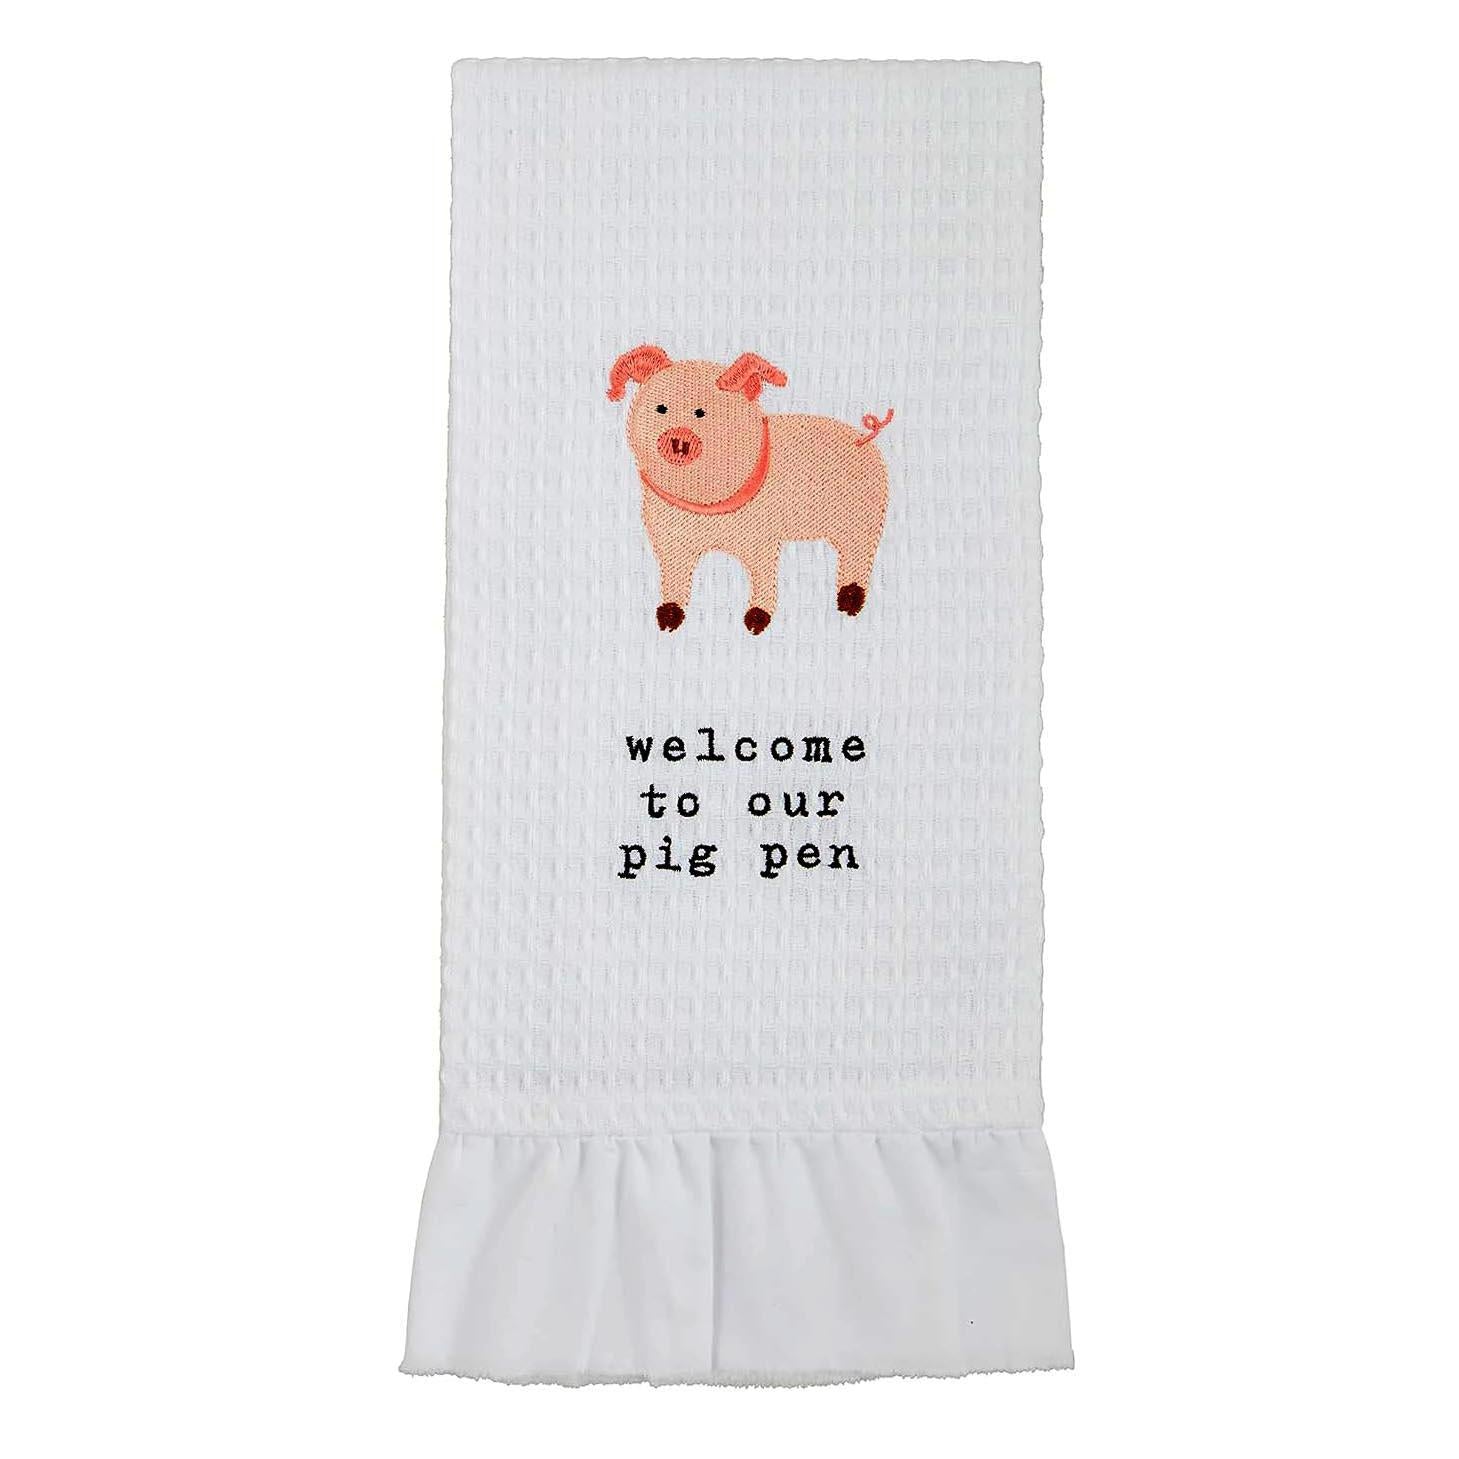 Ruffle Edge Farm Towel: Charming Embroidered Kitchen Accent - Pig pen